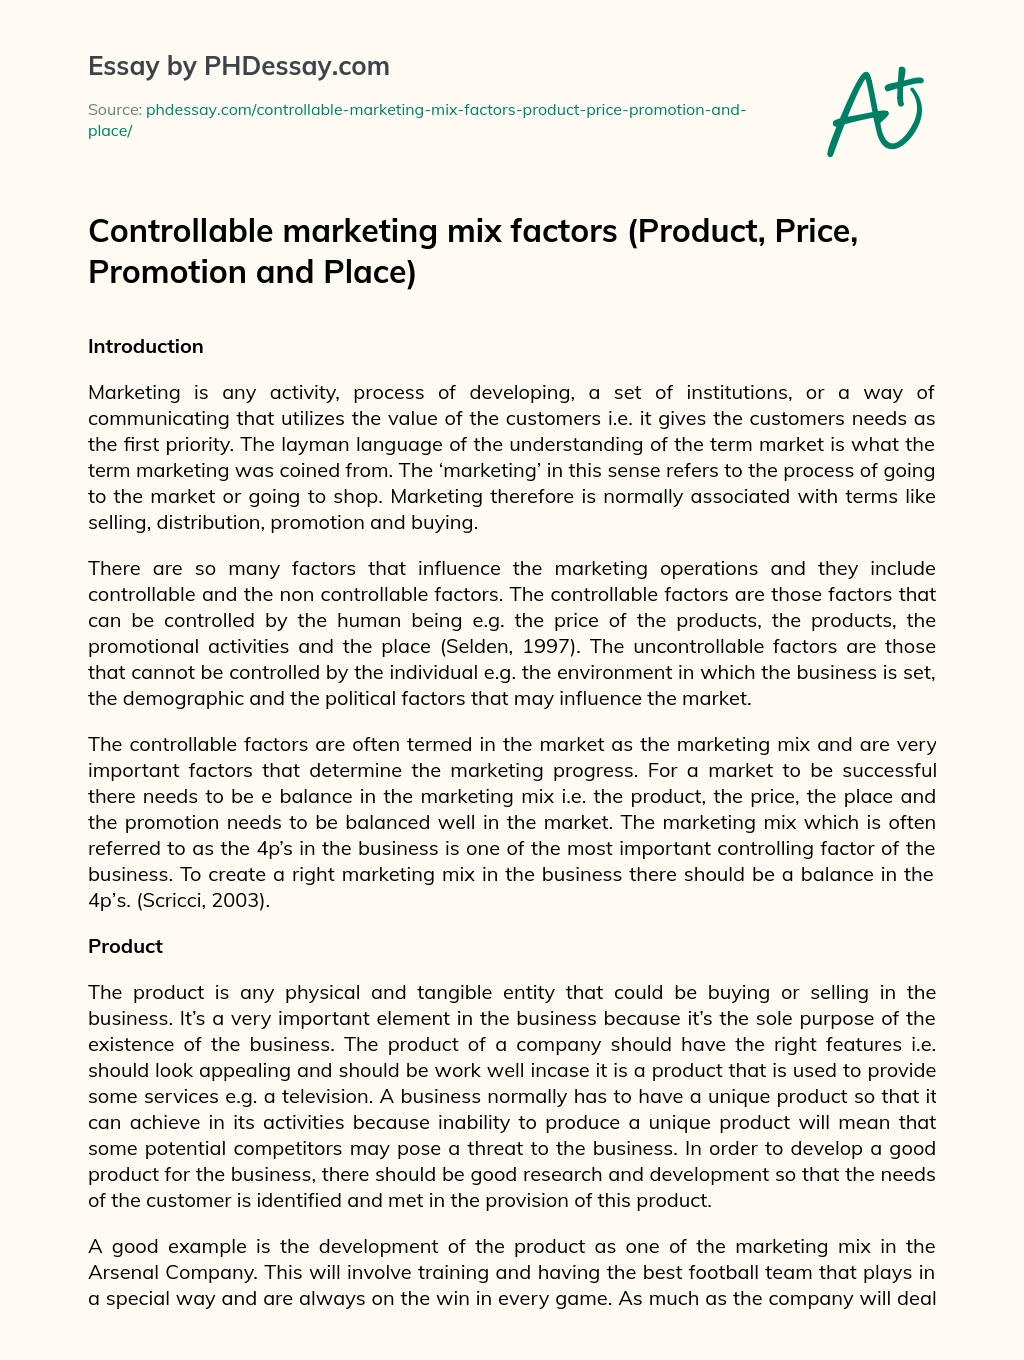 Controllable marketing mix factors (Product, Price, Promotion and Place) essay